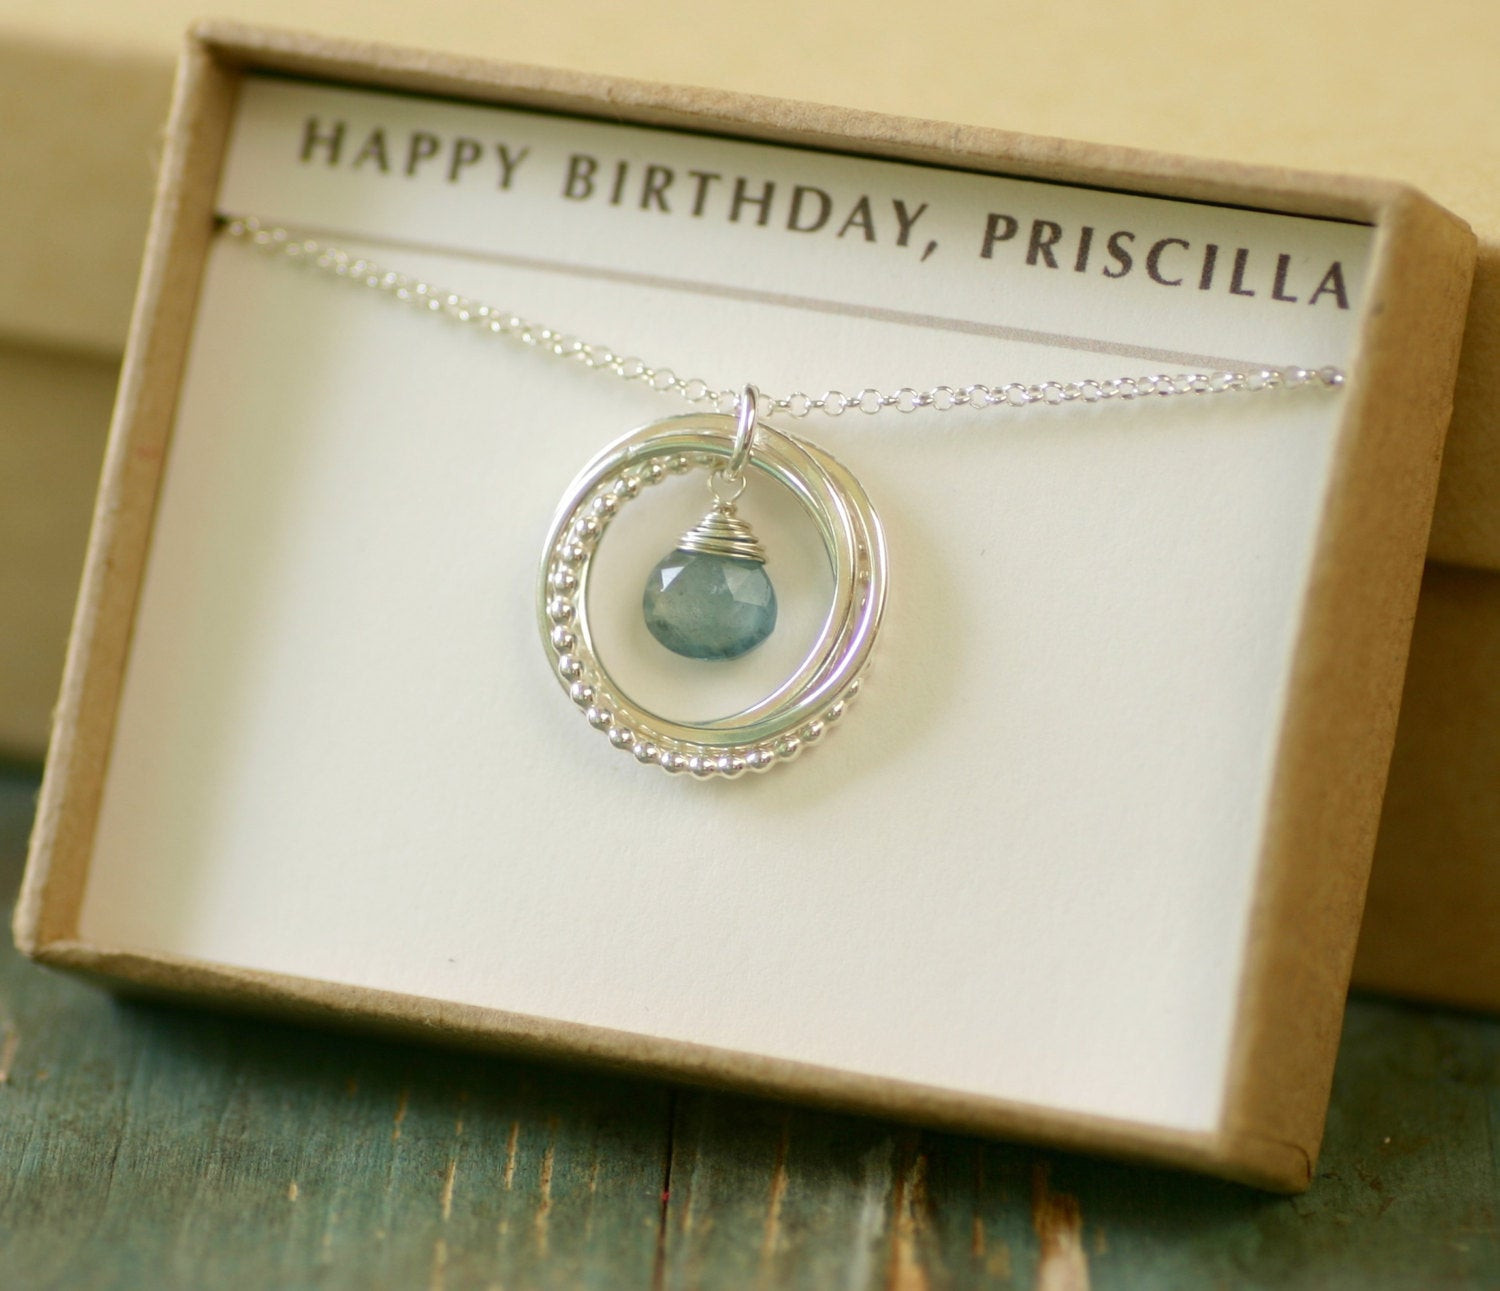 40Th Birthday Gift Ideas For Sister
 The Best 40th Birthday Gift Ideas for Sister Best Gift